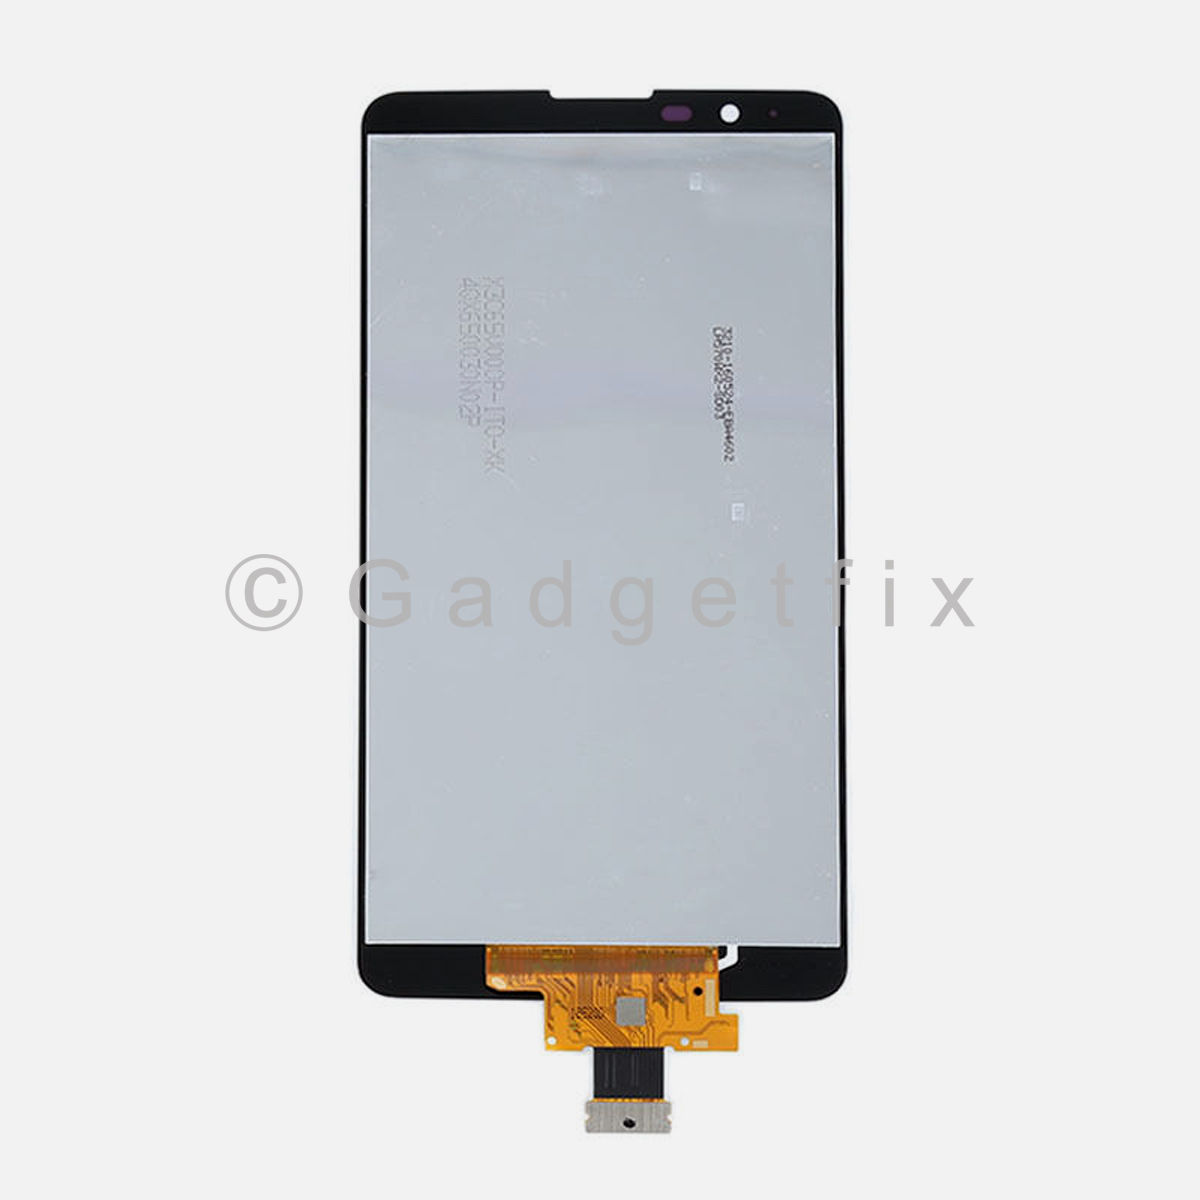 LG Stylo 2 LS775 Stylus 2 K540 LCD Display Touch Screen Digitizer Replacement